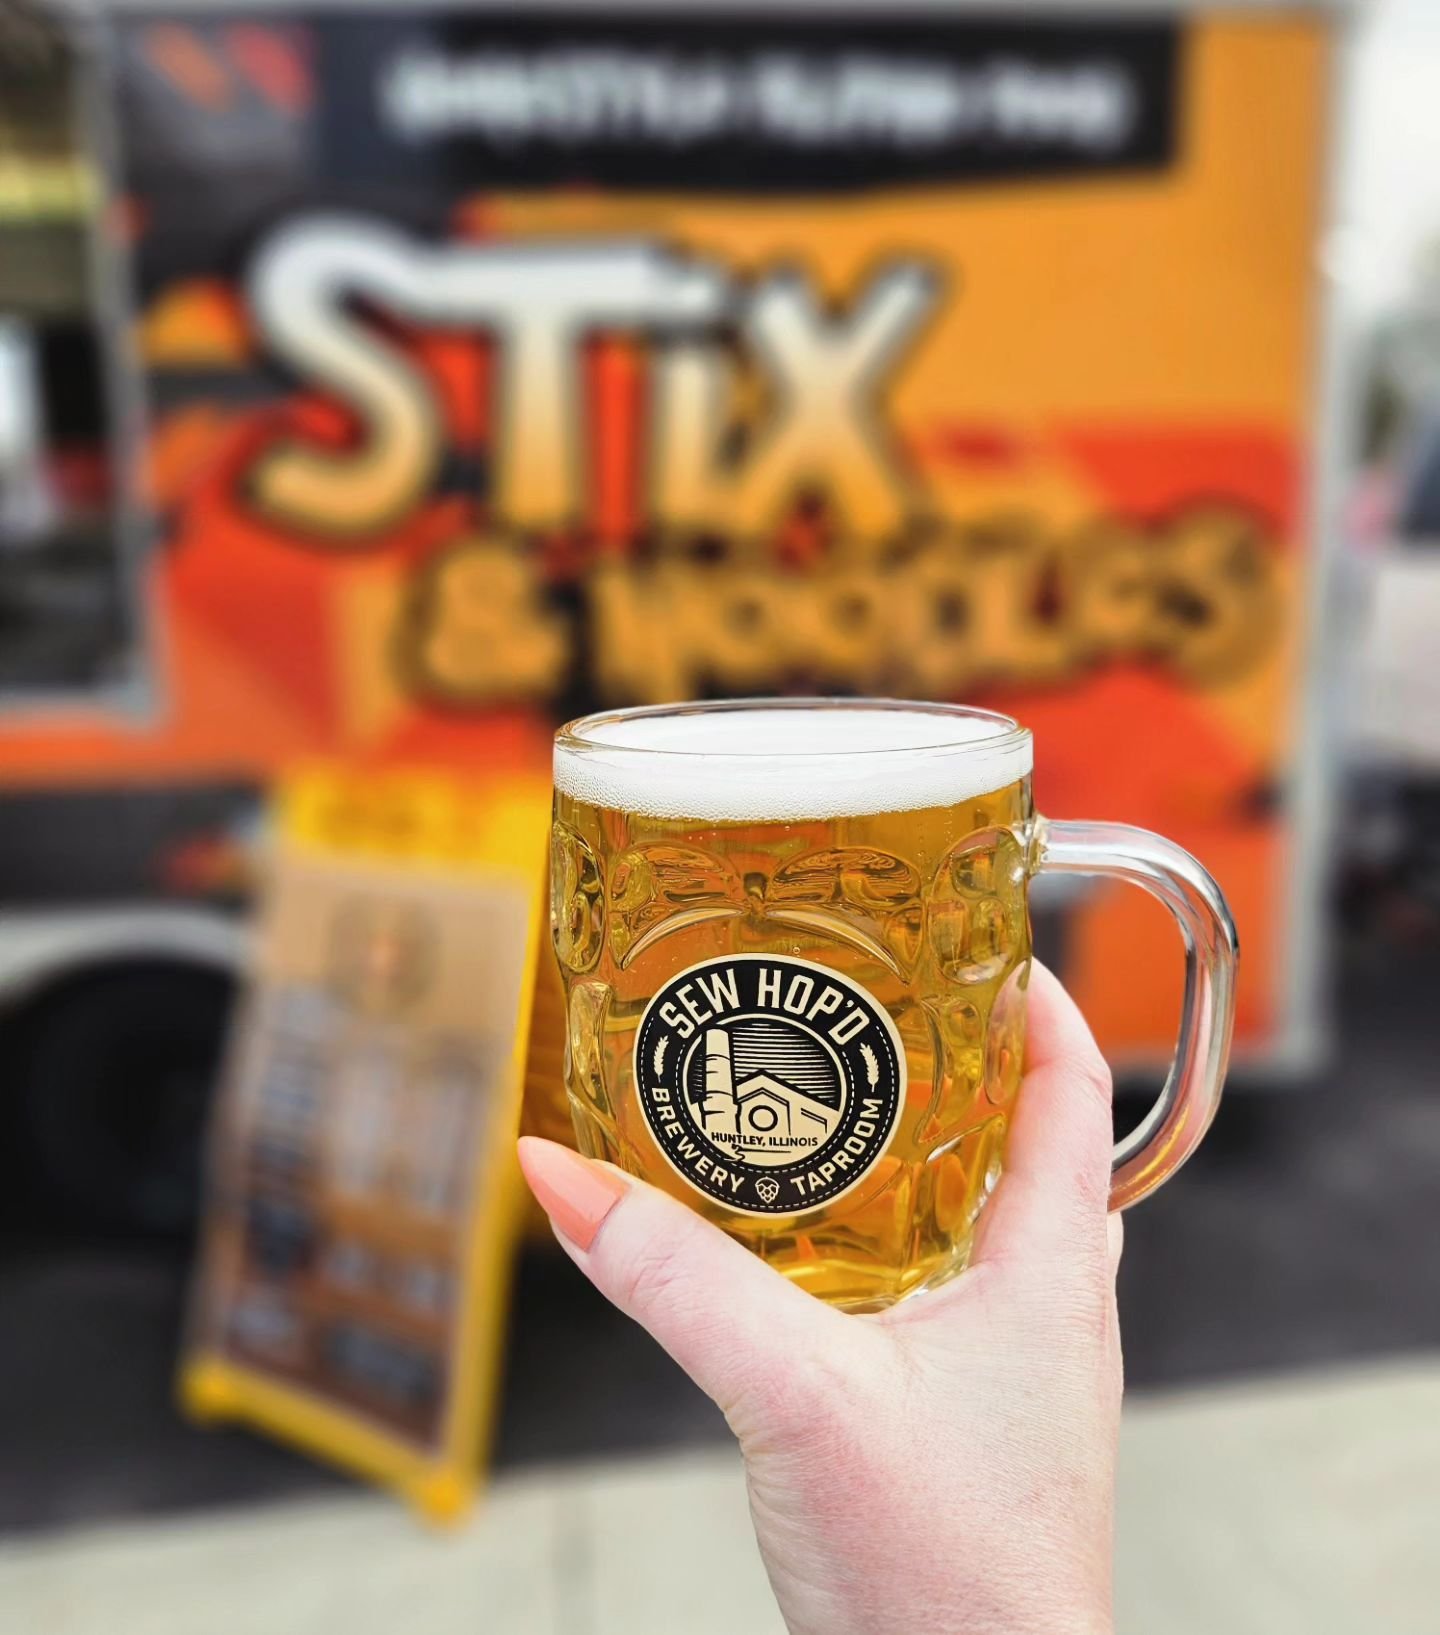 We're climbing the midweek hump and kicking off a new month! Our friends in the orange food truck are pulling up to the taproom today! @stixandnoodles will be here from 4:30-7:30 pm serving up all that amazing Filipino inspired deliciousness! The sun